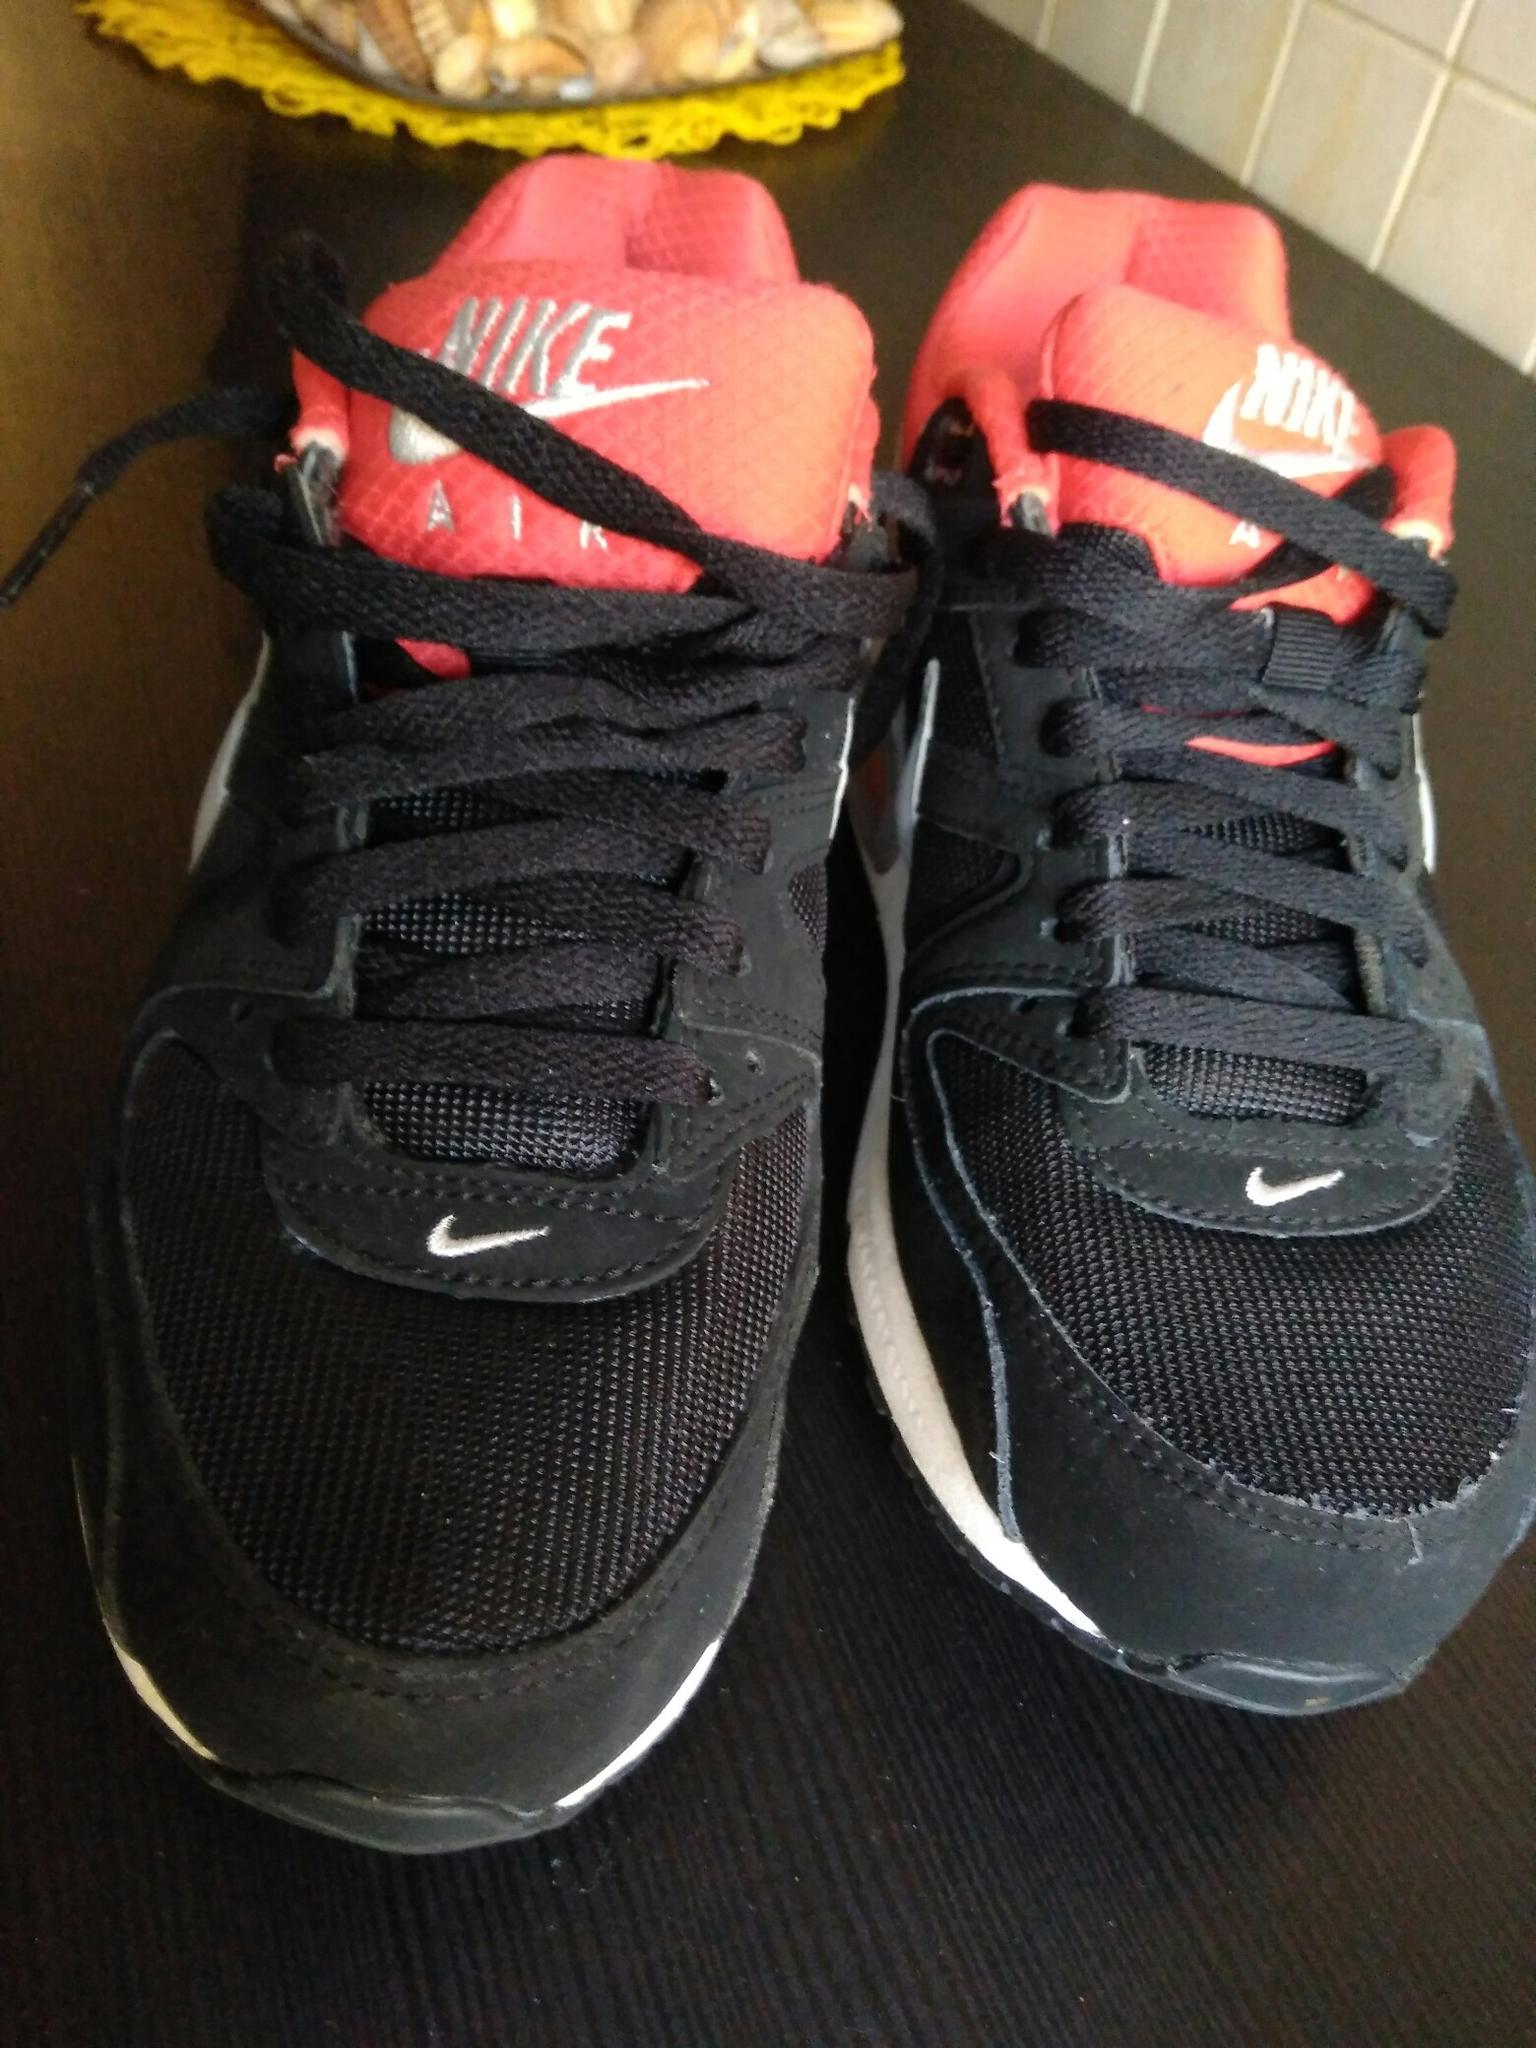 Scarpe Nike Air in 00133 Roma for €40.00 for sale | Shpock